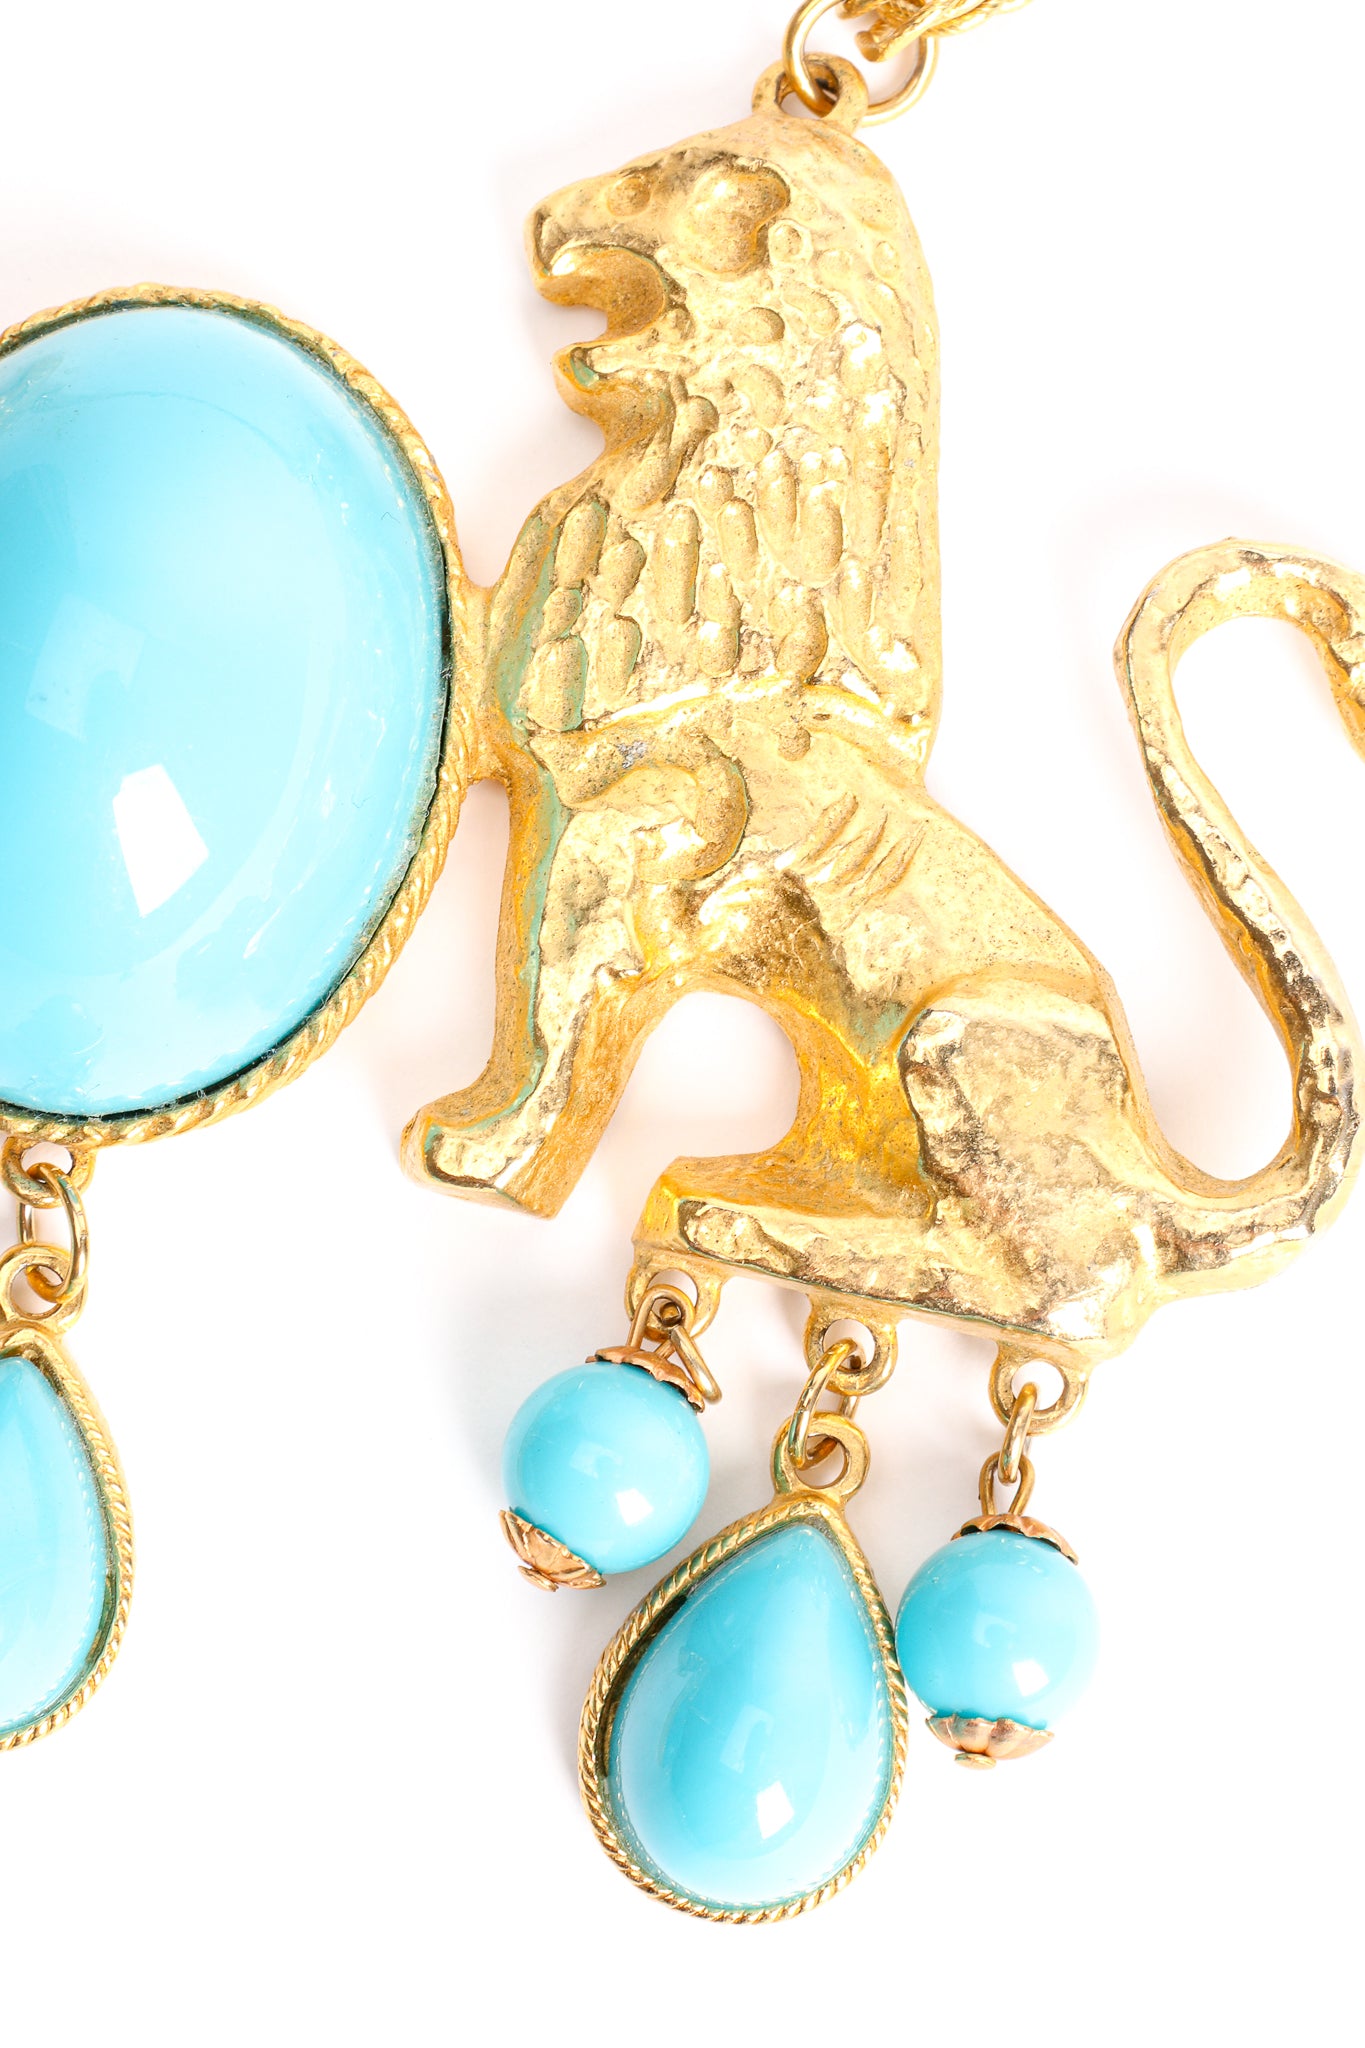 Vintage Unsigned Donald Stannard Imperial Lion Necklace detail at Recess Los Angeles